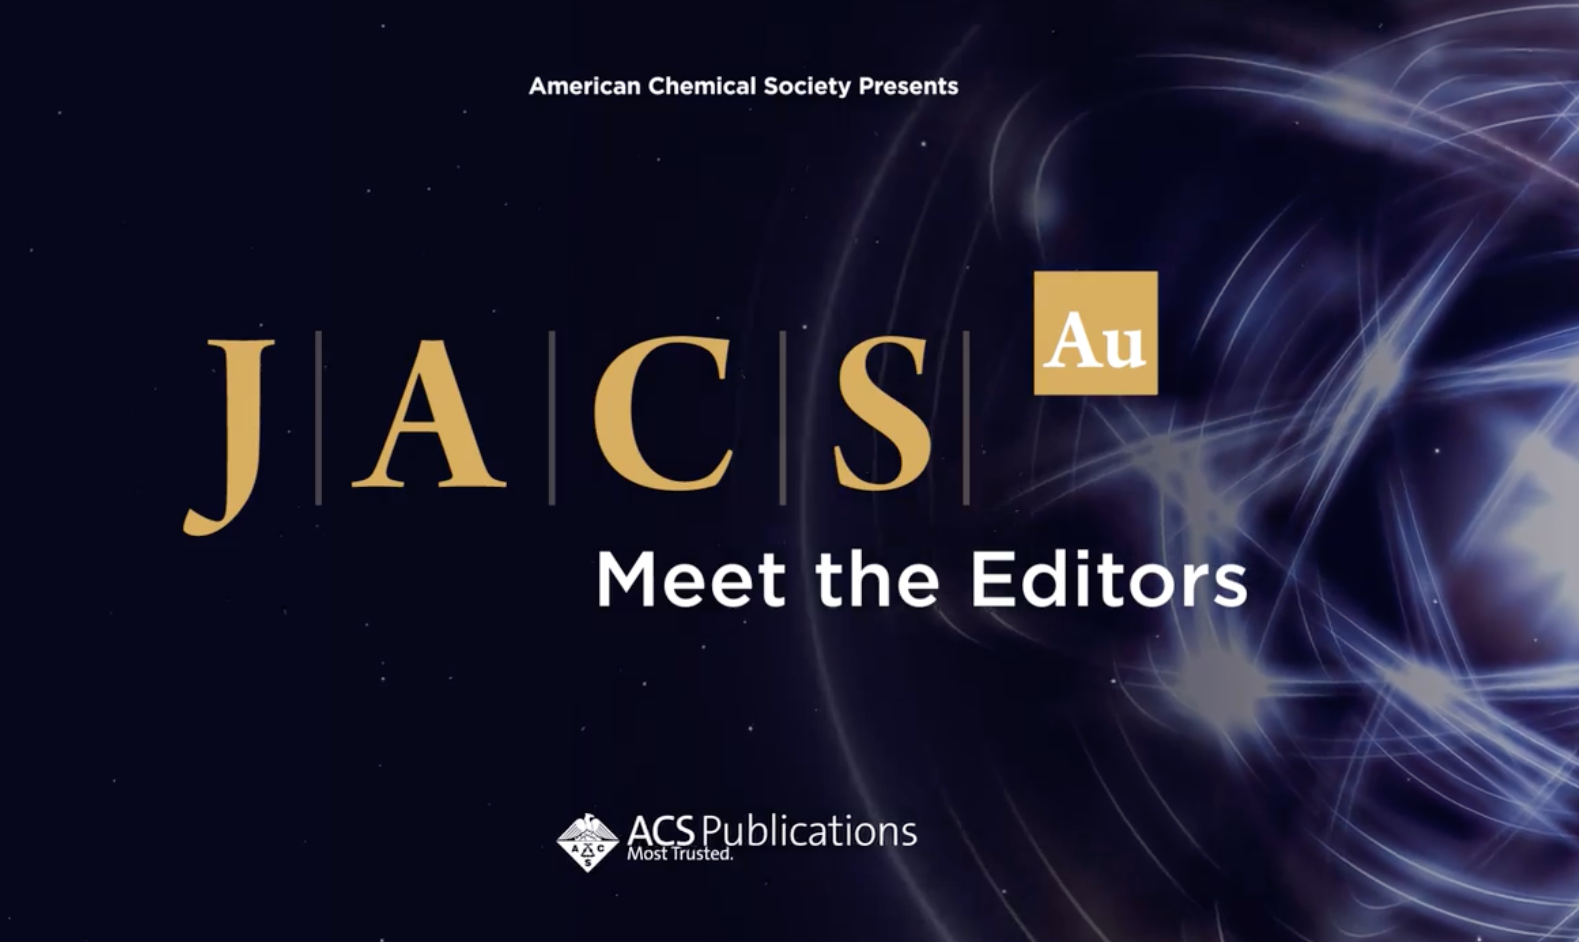 JACS Au Meet the Editors Video with Christopher Jones and Wasiu Lawal